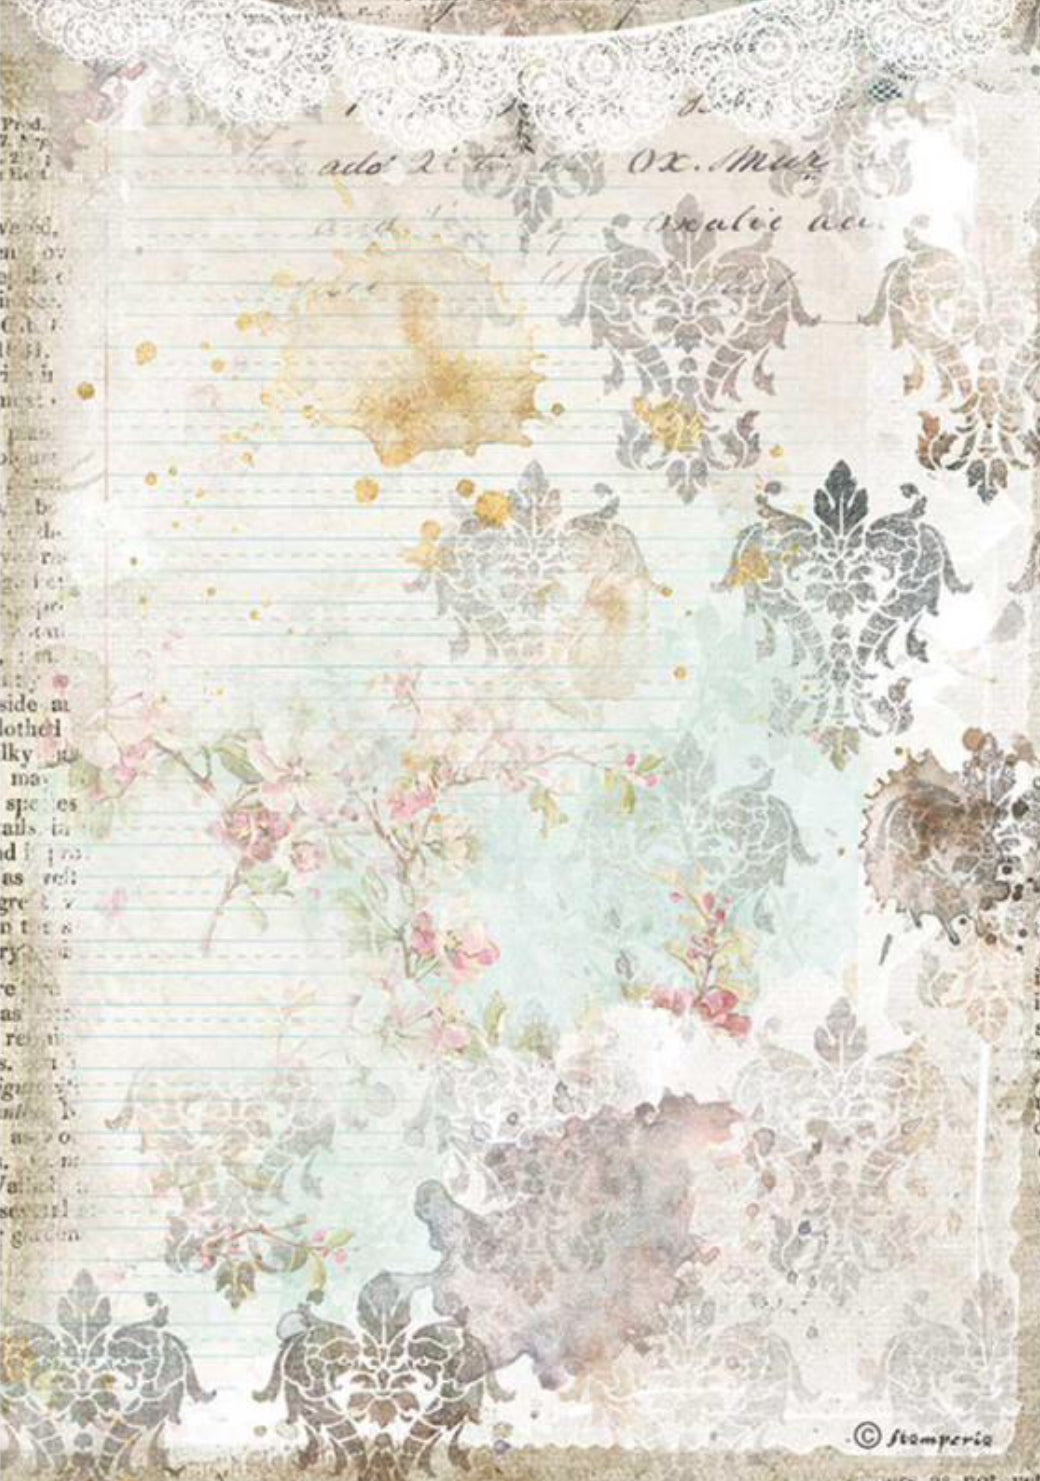 Stamperia - Romantic Journal Texture with Lace - Decoupage Rice Paper A4 - DFSA4556